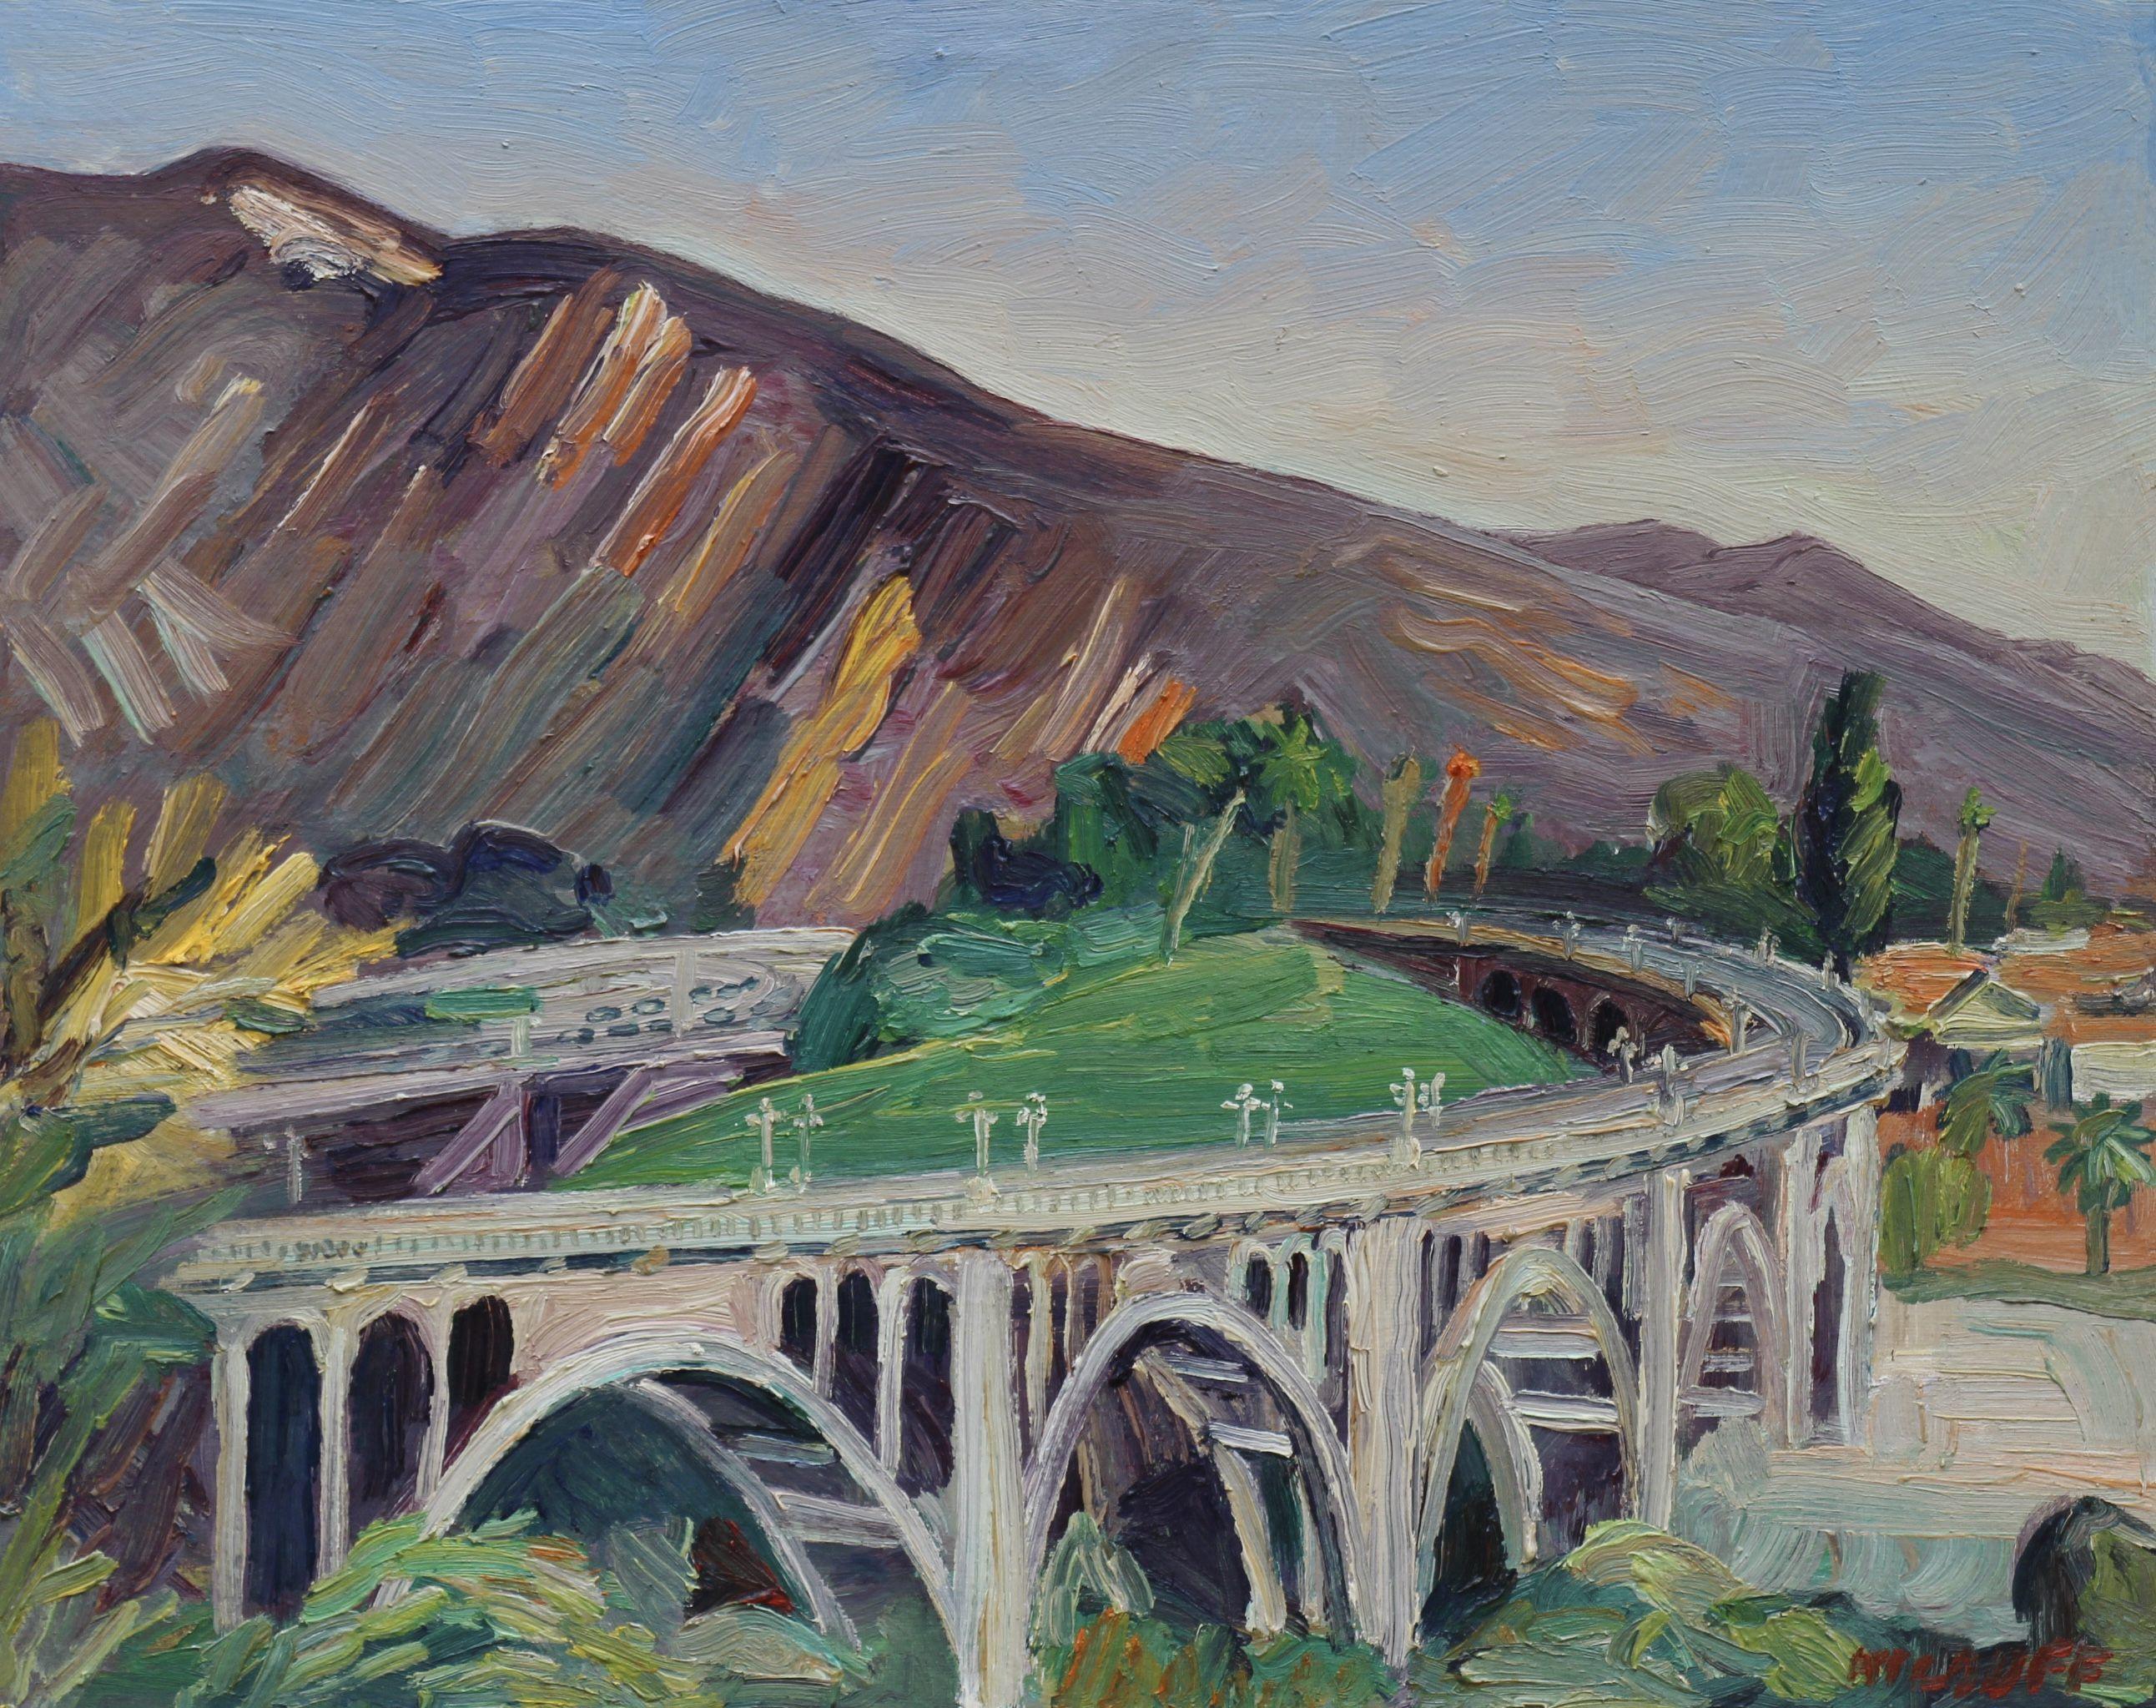 Plein air (painted on location) oil painting of the Colorado Street Bridge in Pasadena, California. :: Painting :: Impressionist :: This piece comes with an official certificate of authenticity signed by the artist :: Ready to Hang: No :: Signed: